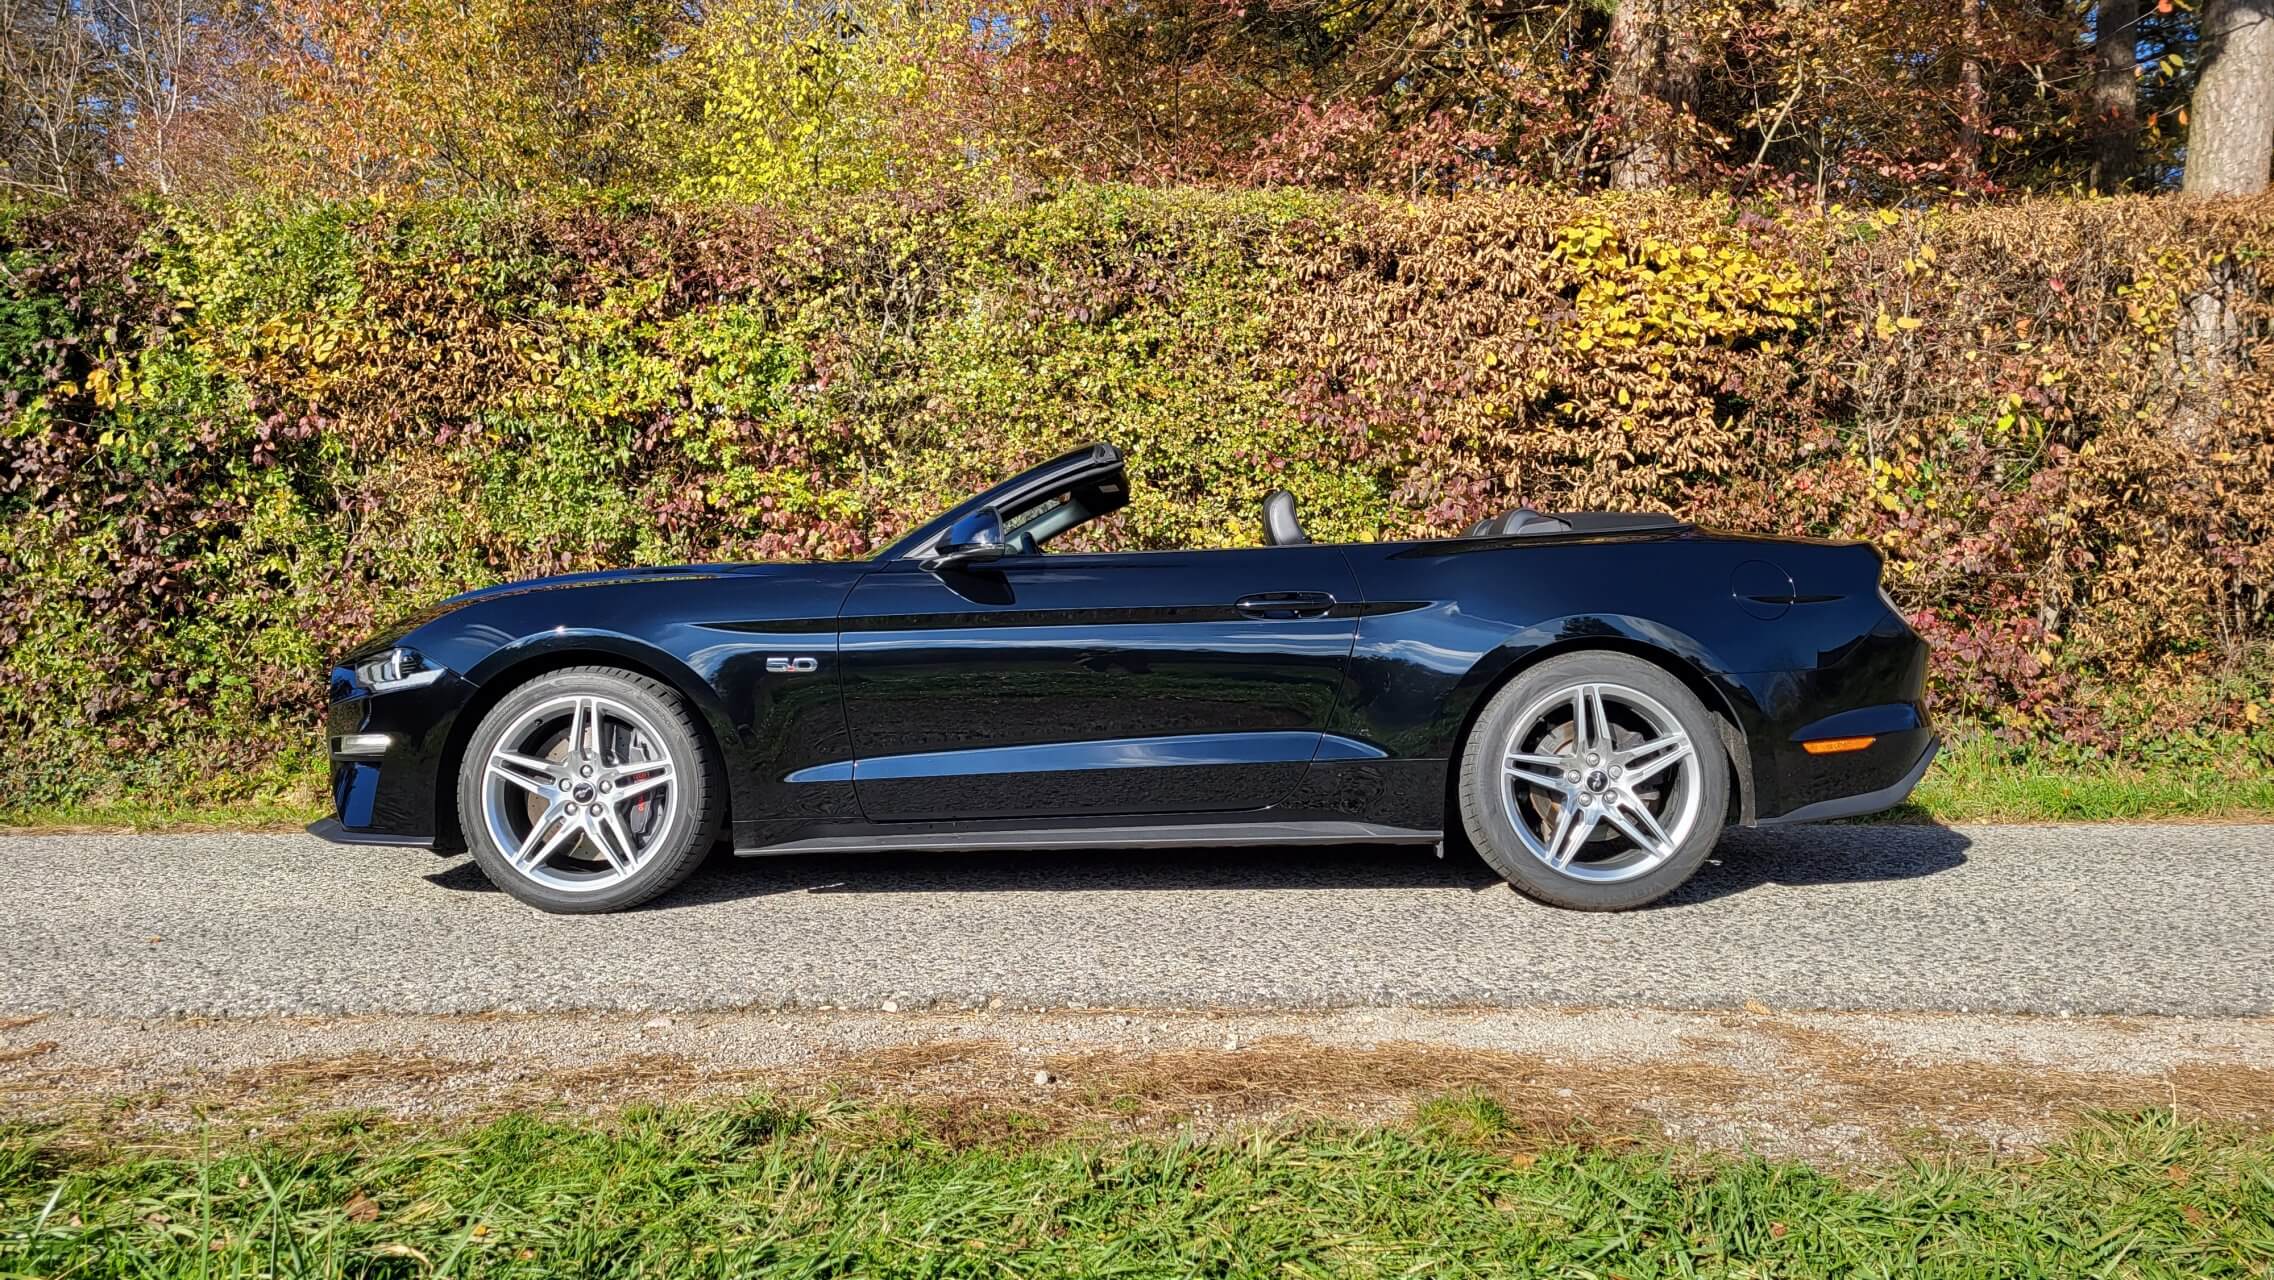 Ford Mustang GT 5.0 Cabrio - aad3999c-1e48-48d4-8952-a54b7fa84355